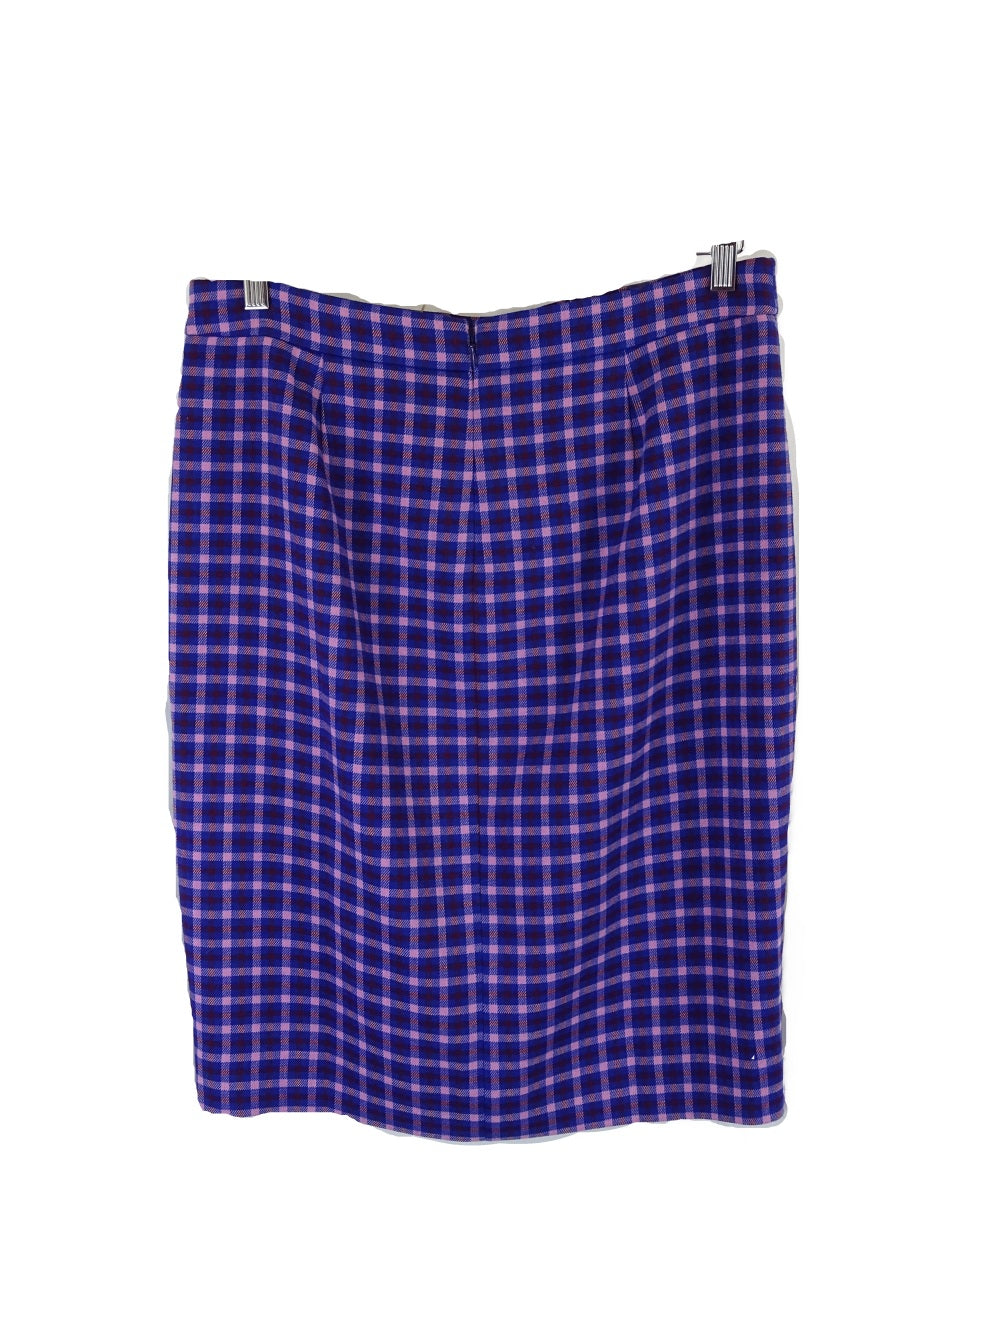 J. Crew Blue and Pink Plaid Skirt 10